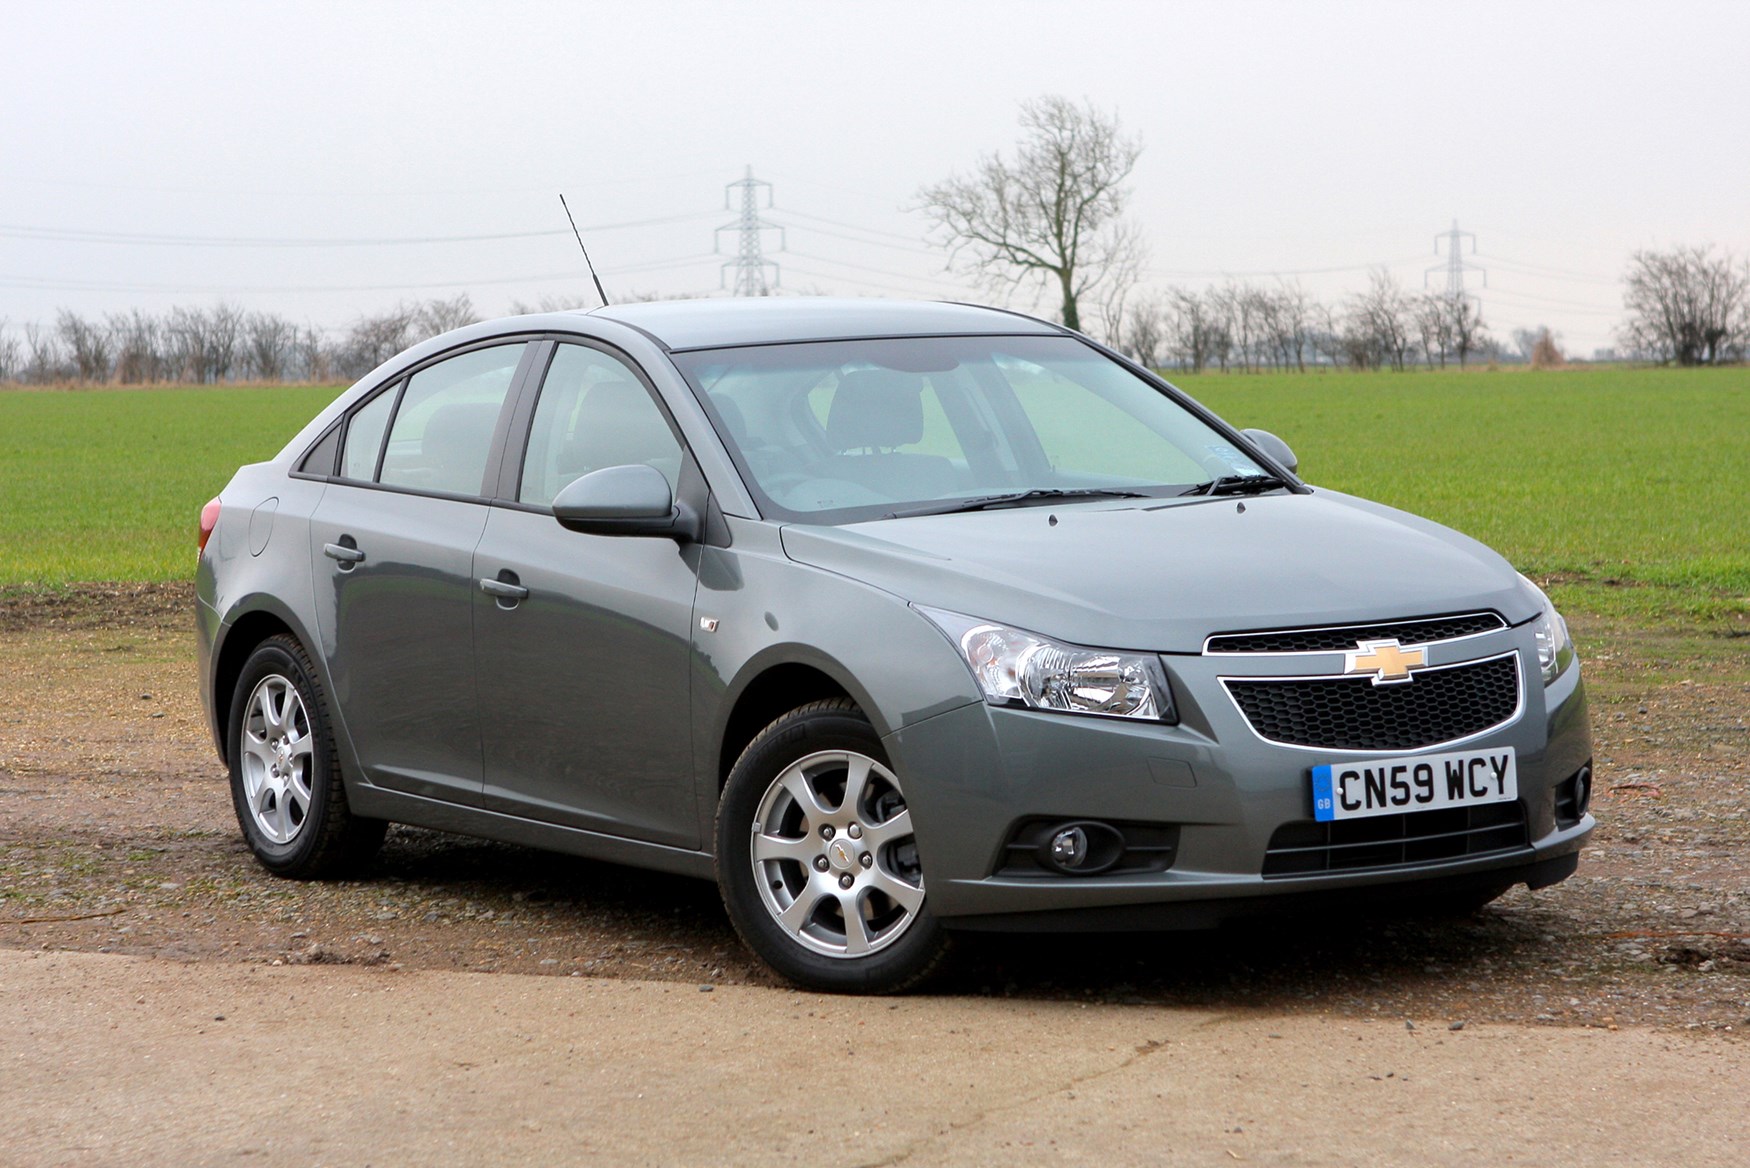 Used Chevrolet Cruze Saloon (2009 2011) Review Parkers